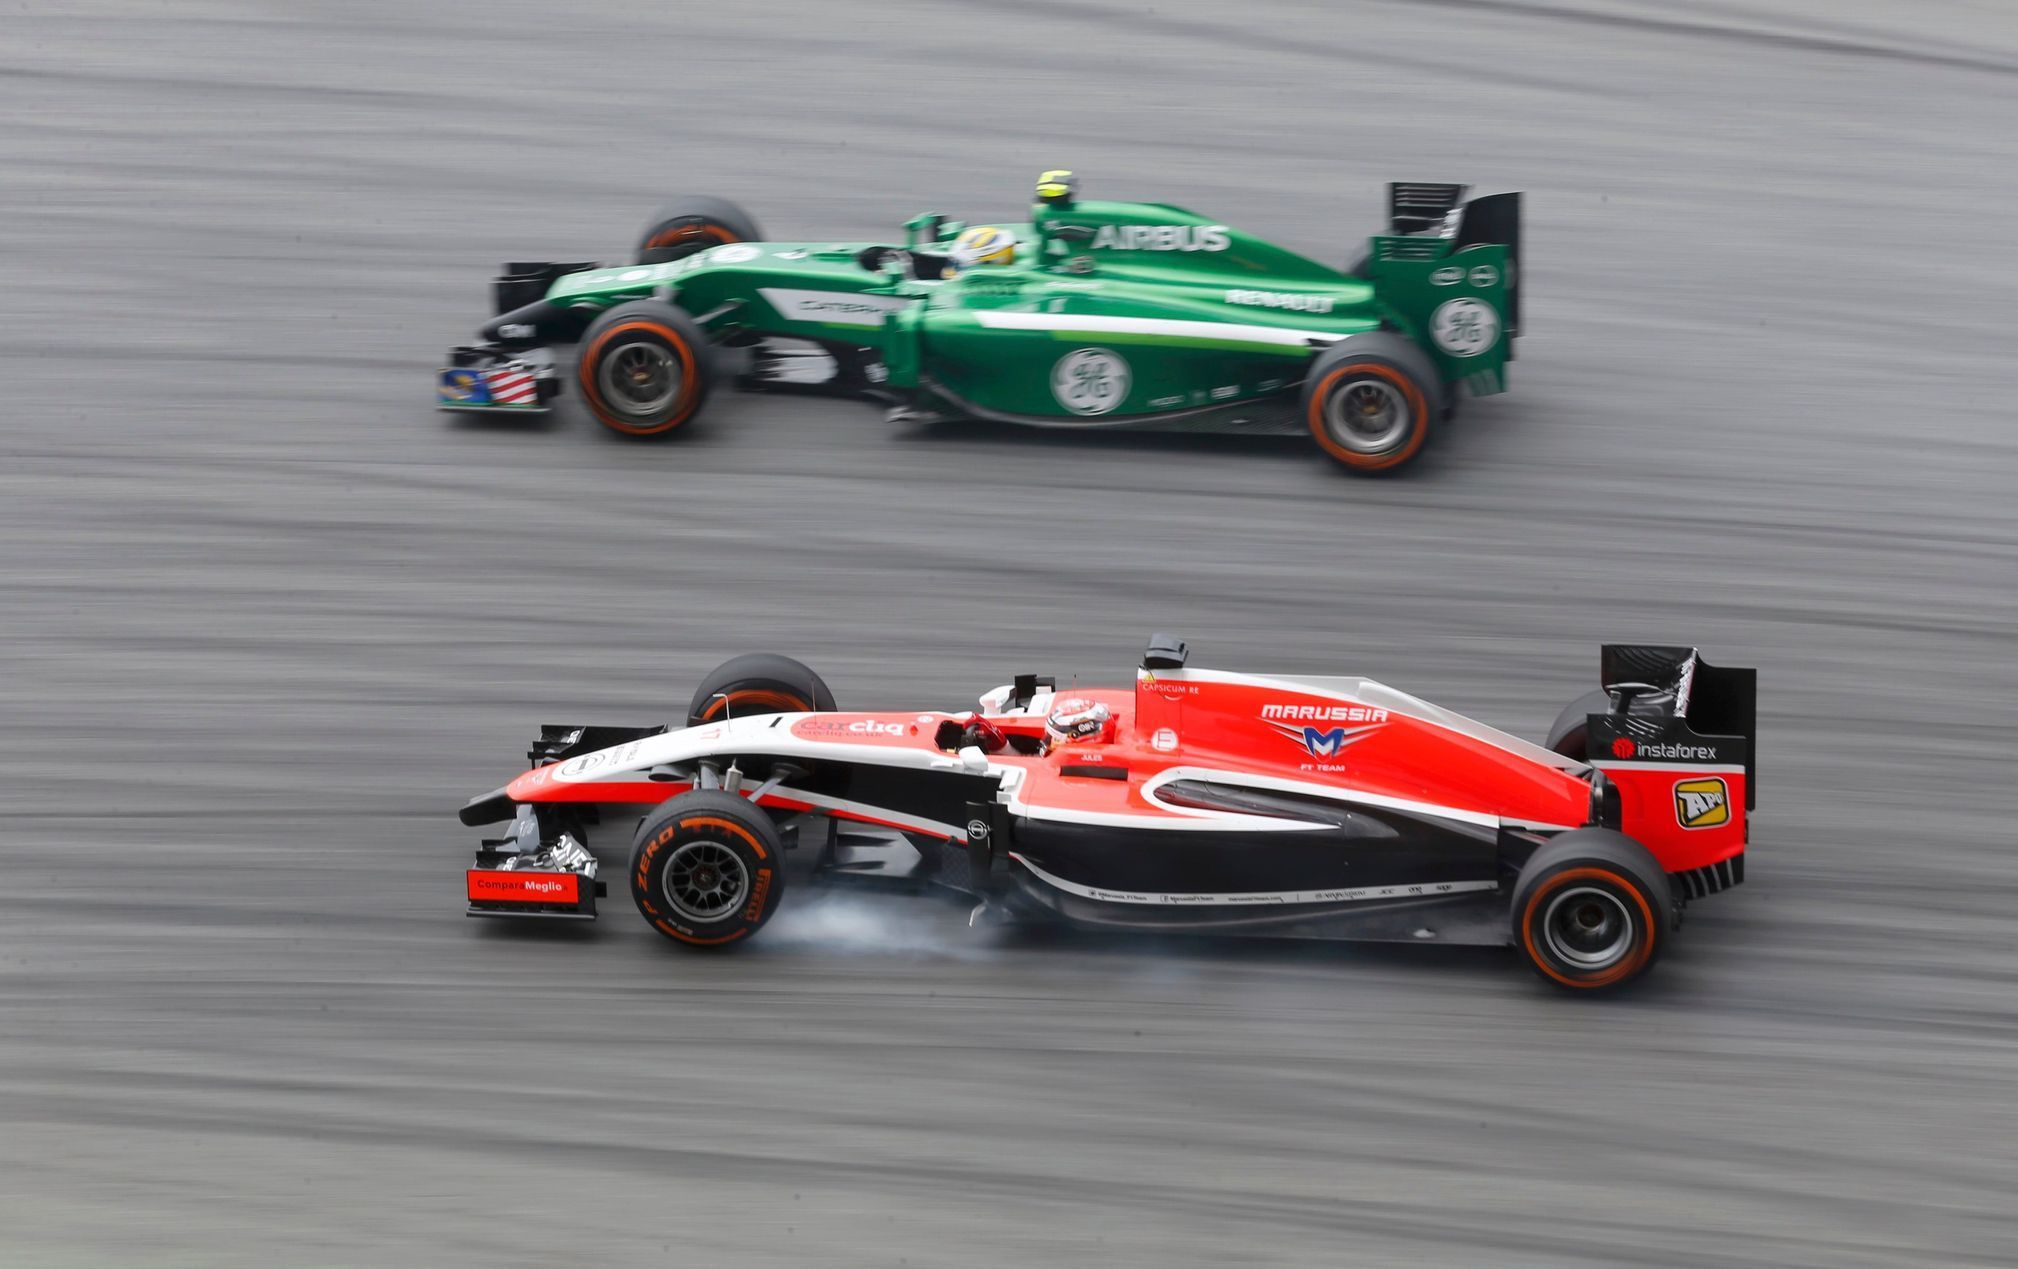 Marussia Formula One driver Bianchi passes Caterham Formula One driver Ericsson during the first practice session of the Malaysian F1 Grand Prix at Sepang International Circuit outside Kuala Lumpur